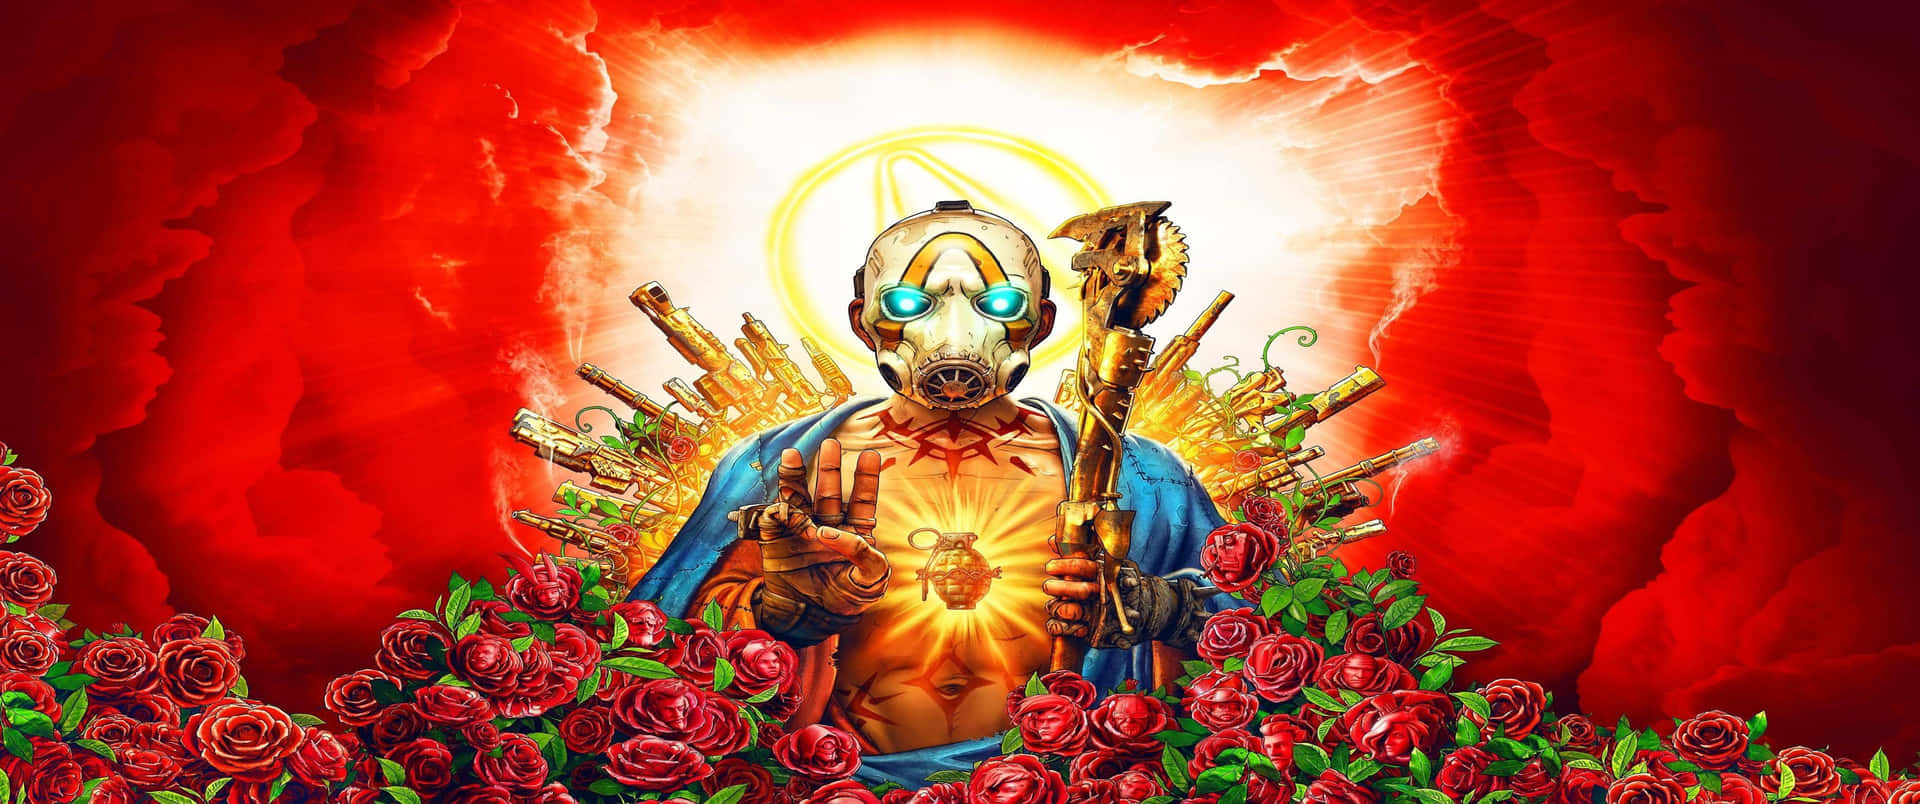 3440x1440p Borderlands 3 Background Red With Steve